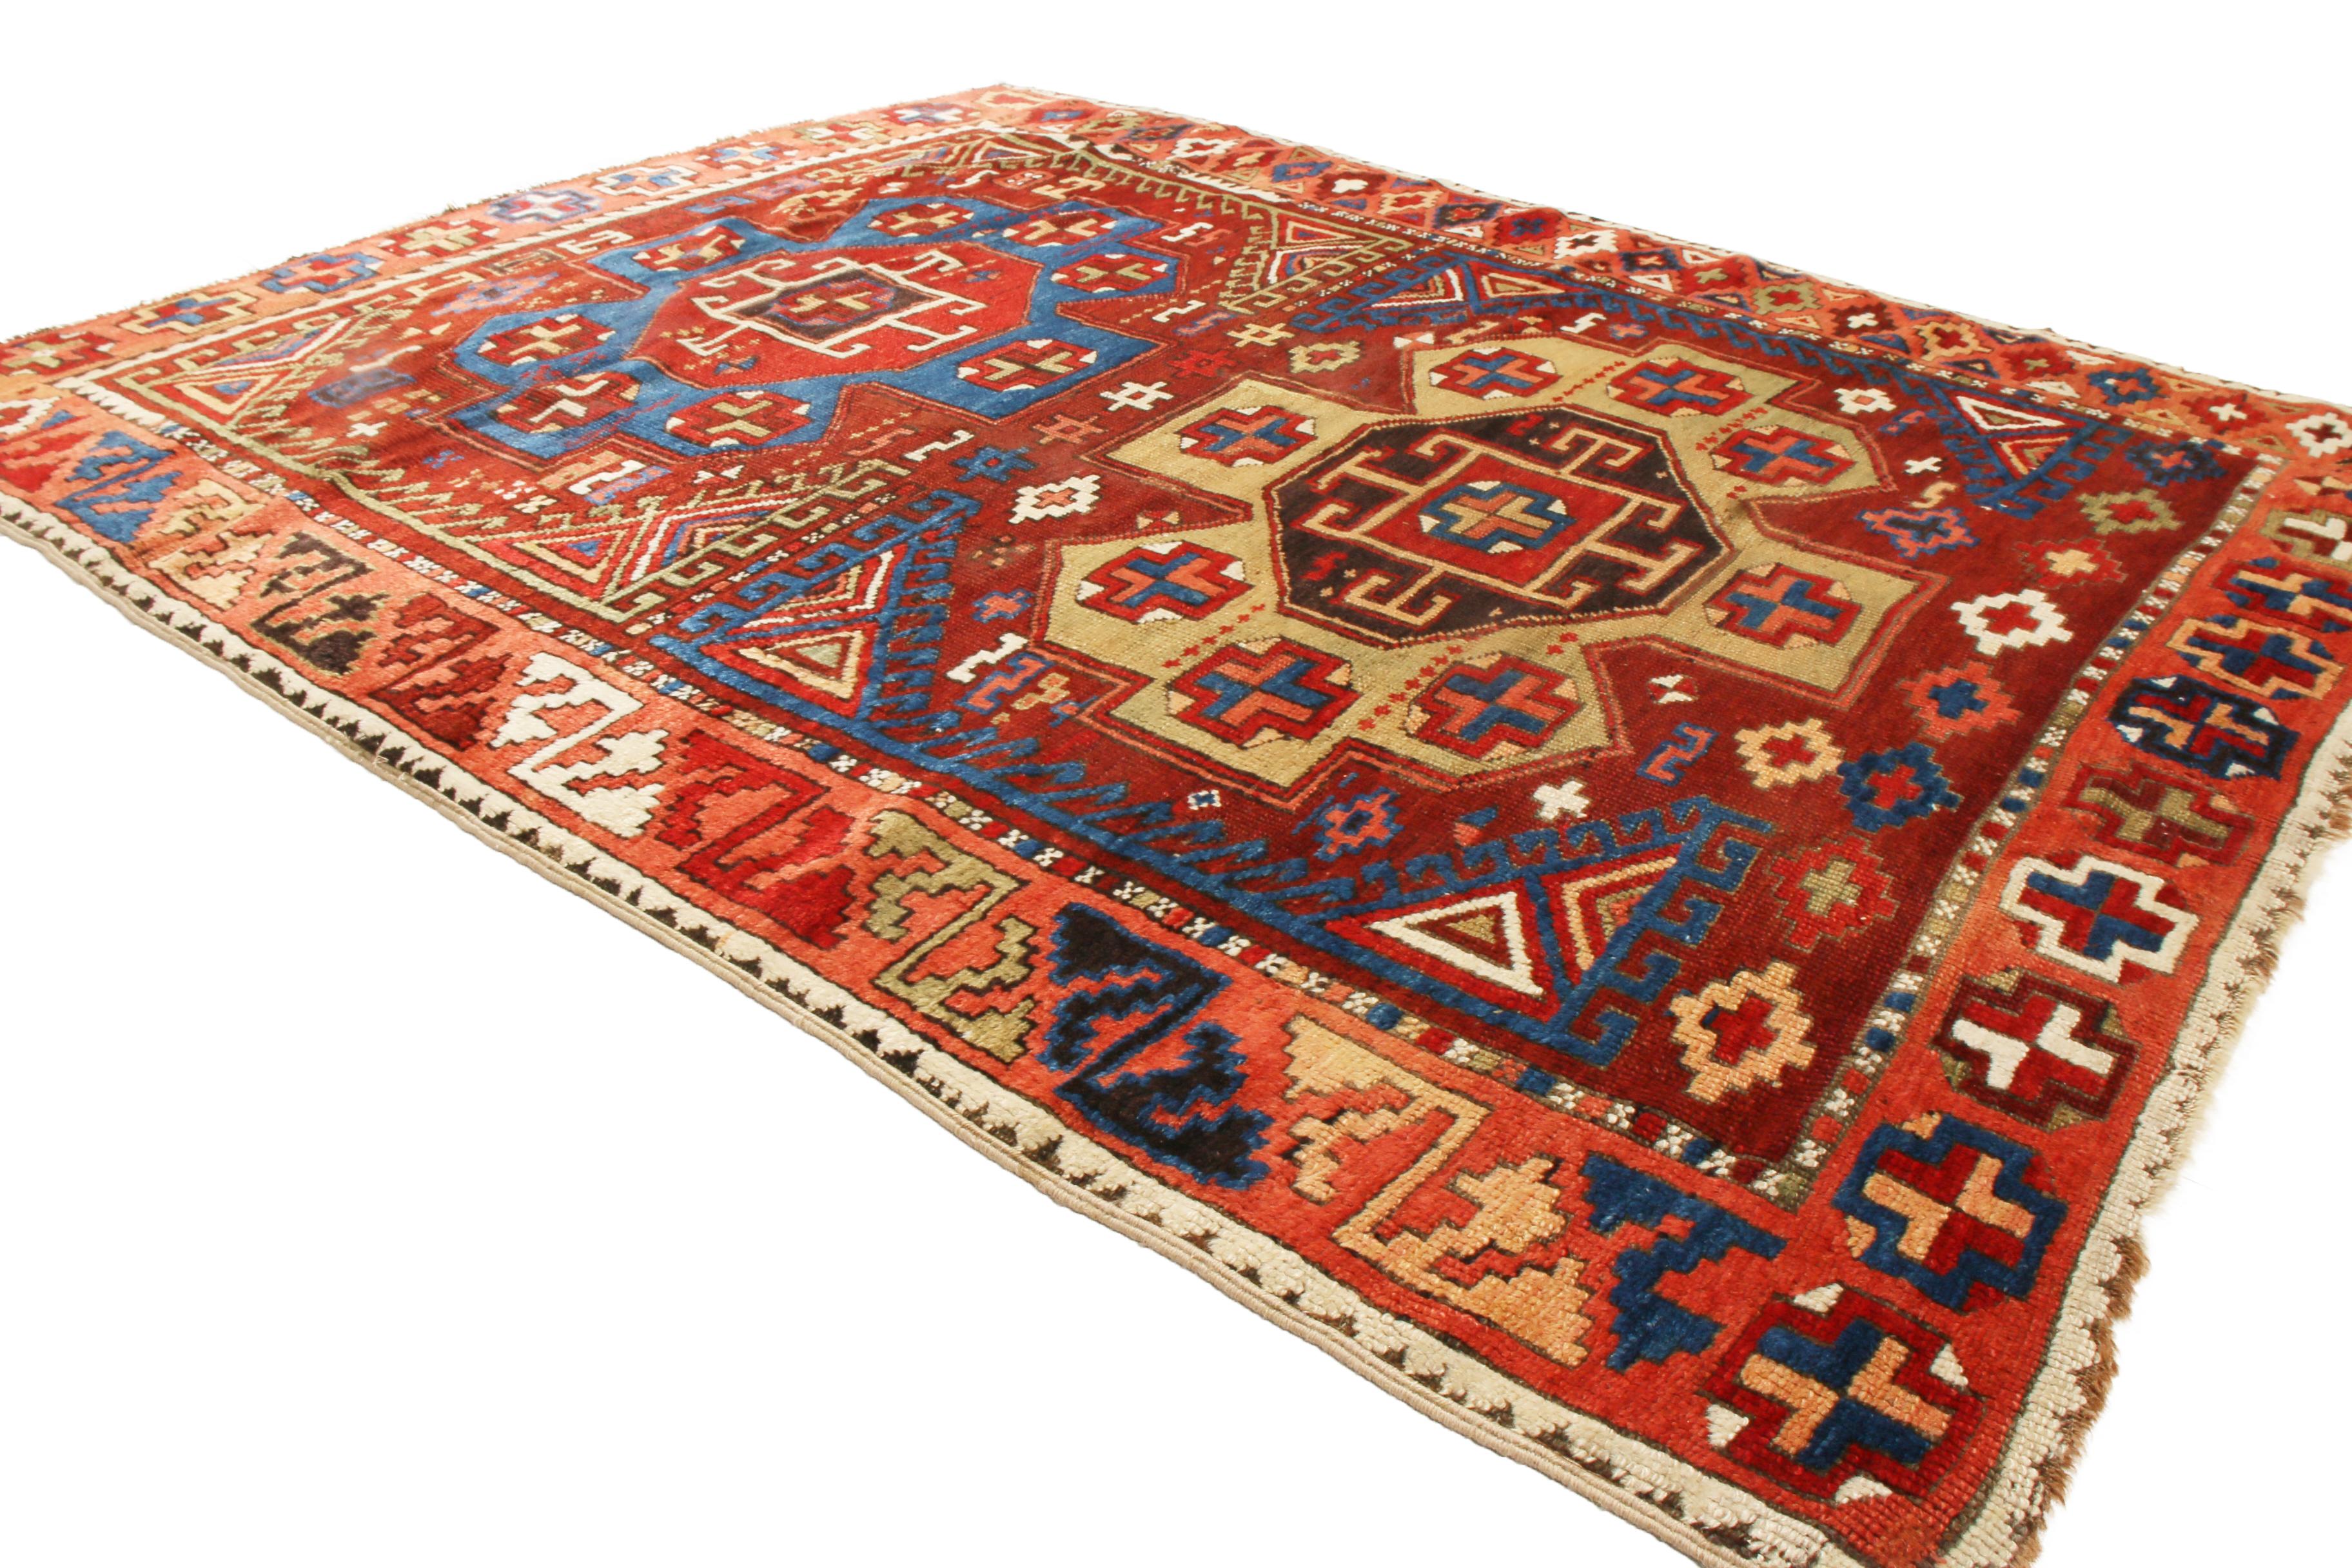 Originating from Turkey between 1900-1920, this antique traditional Yuruk rug features two distinct geometric medallions with centric Gul symbols in beige and blue against a rich burgundy red background. Unique to this piece is that just as the